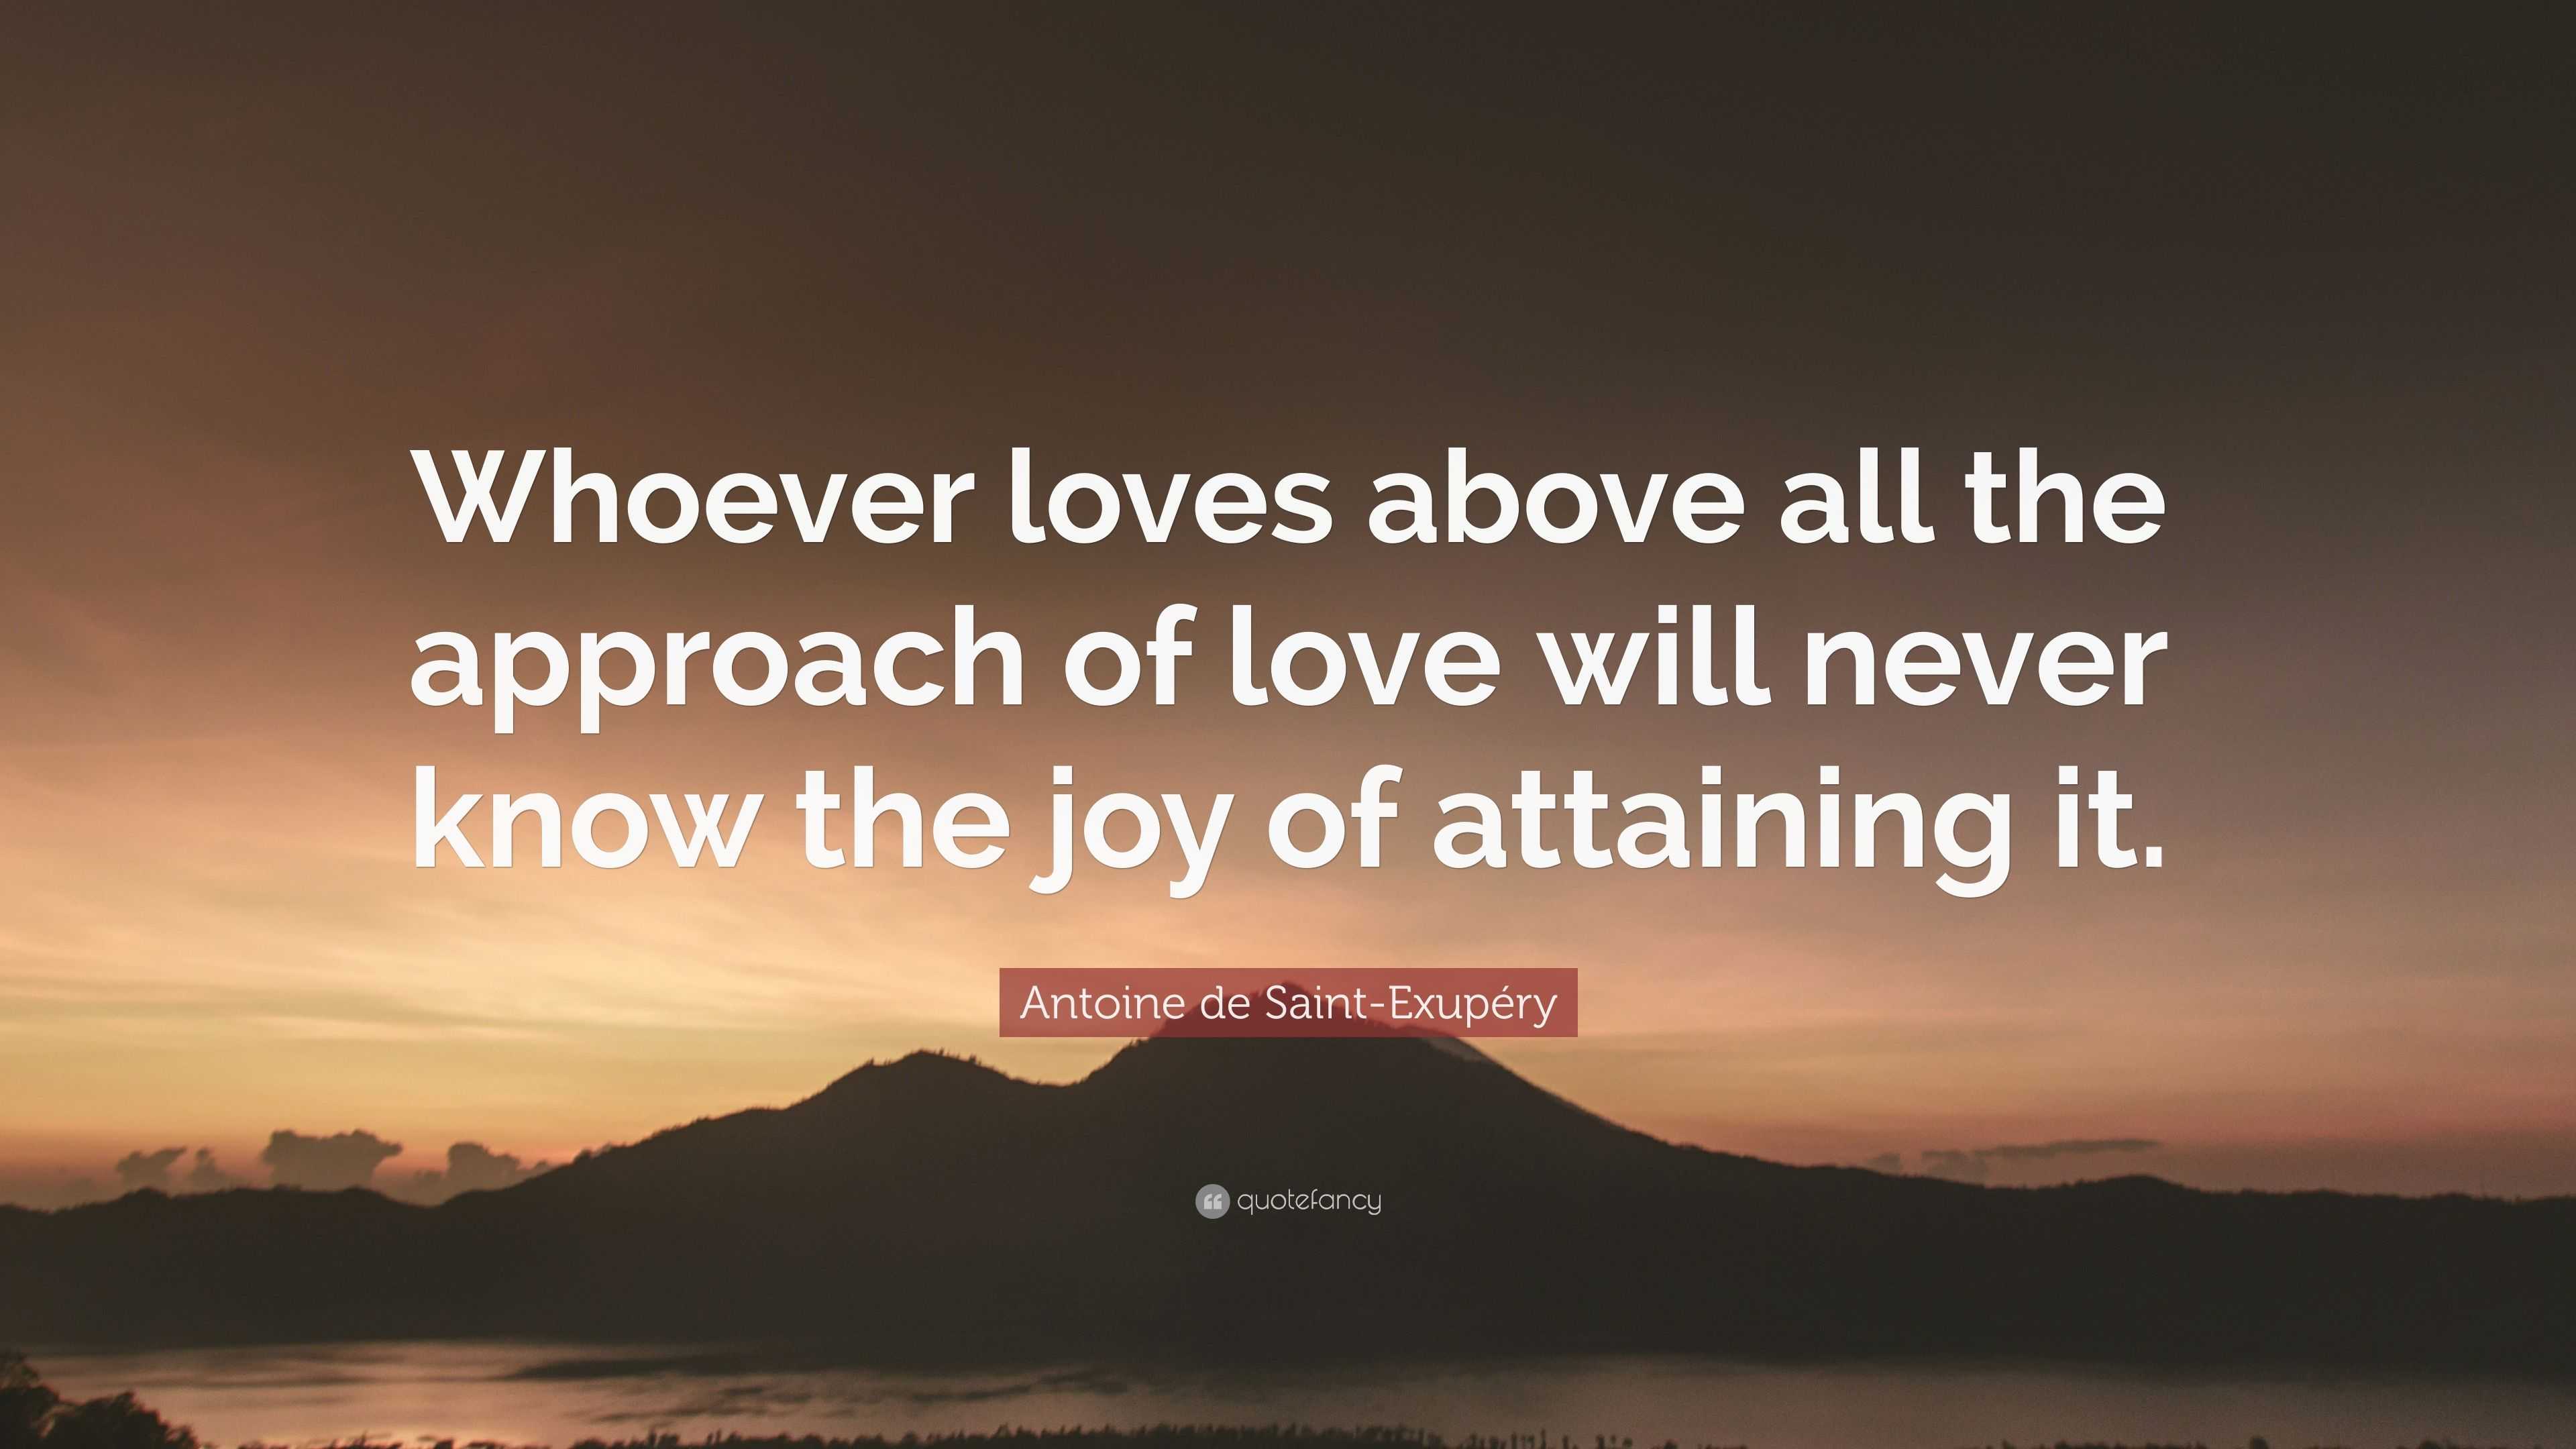 Antoine de Saint-Exupéry Quote: "Whoever loves above all the approach of love will never know ...